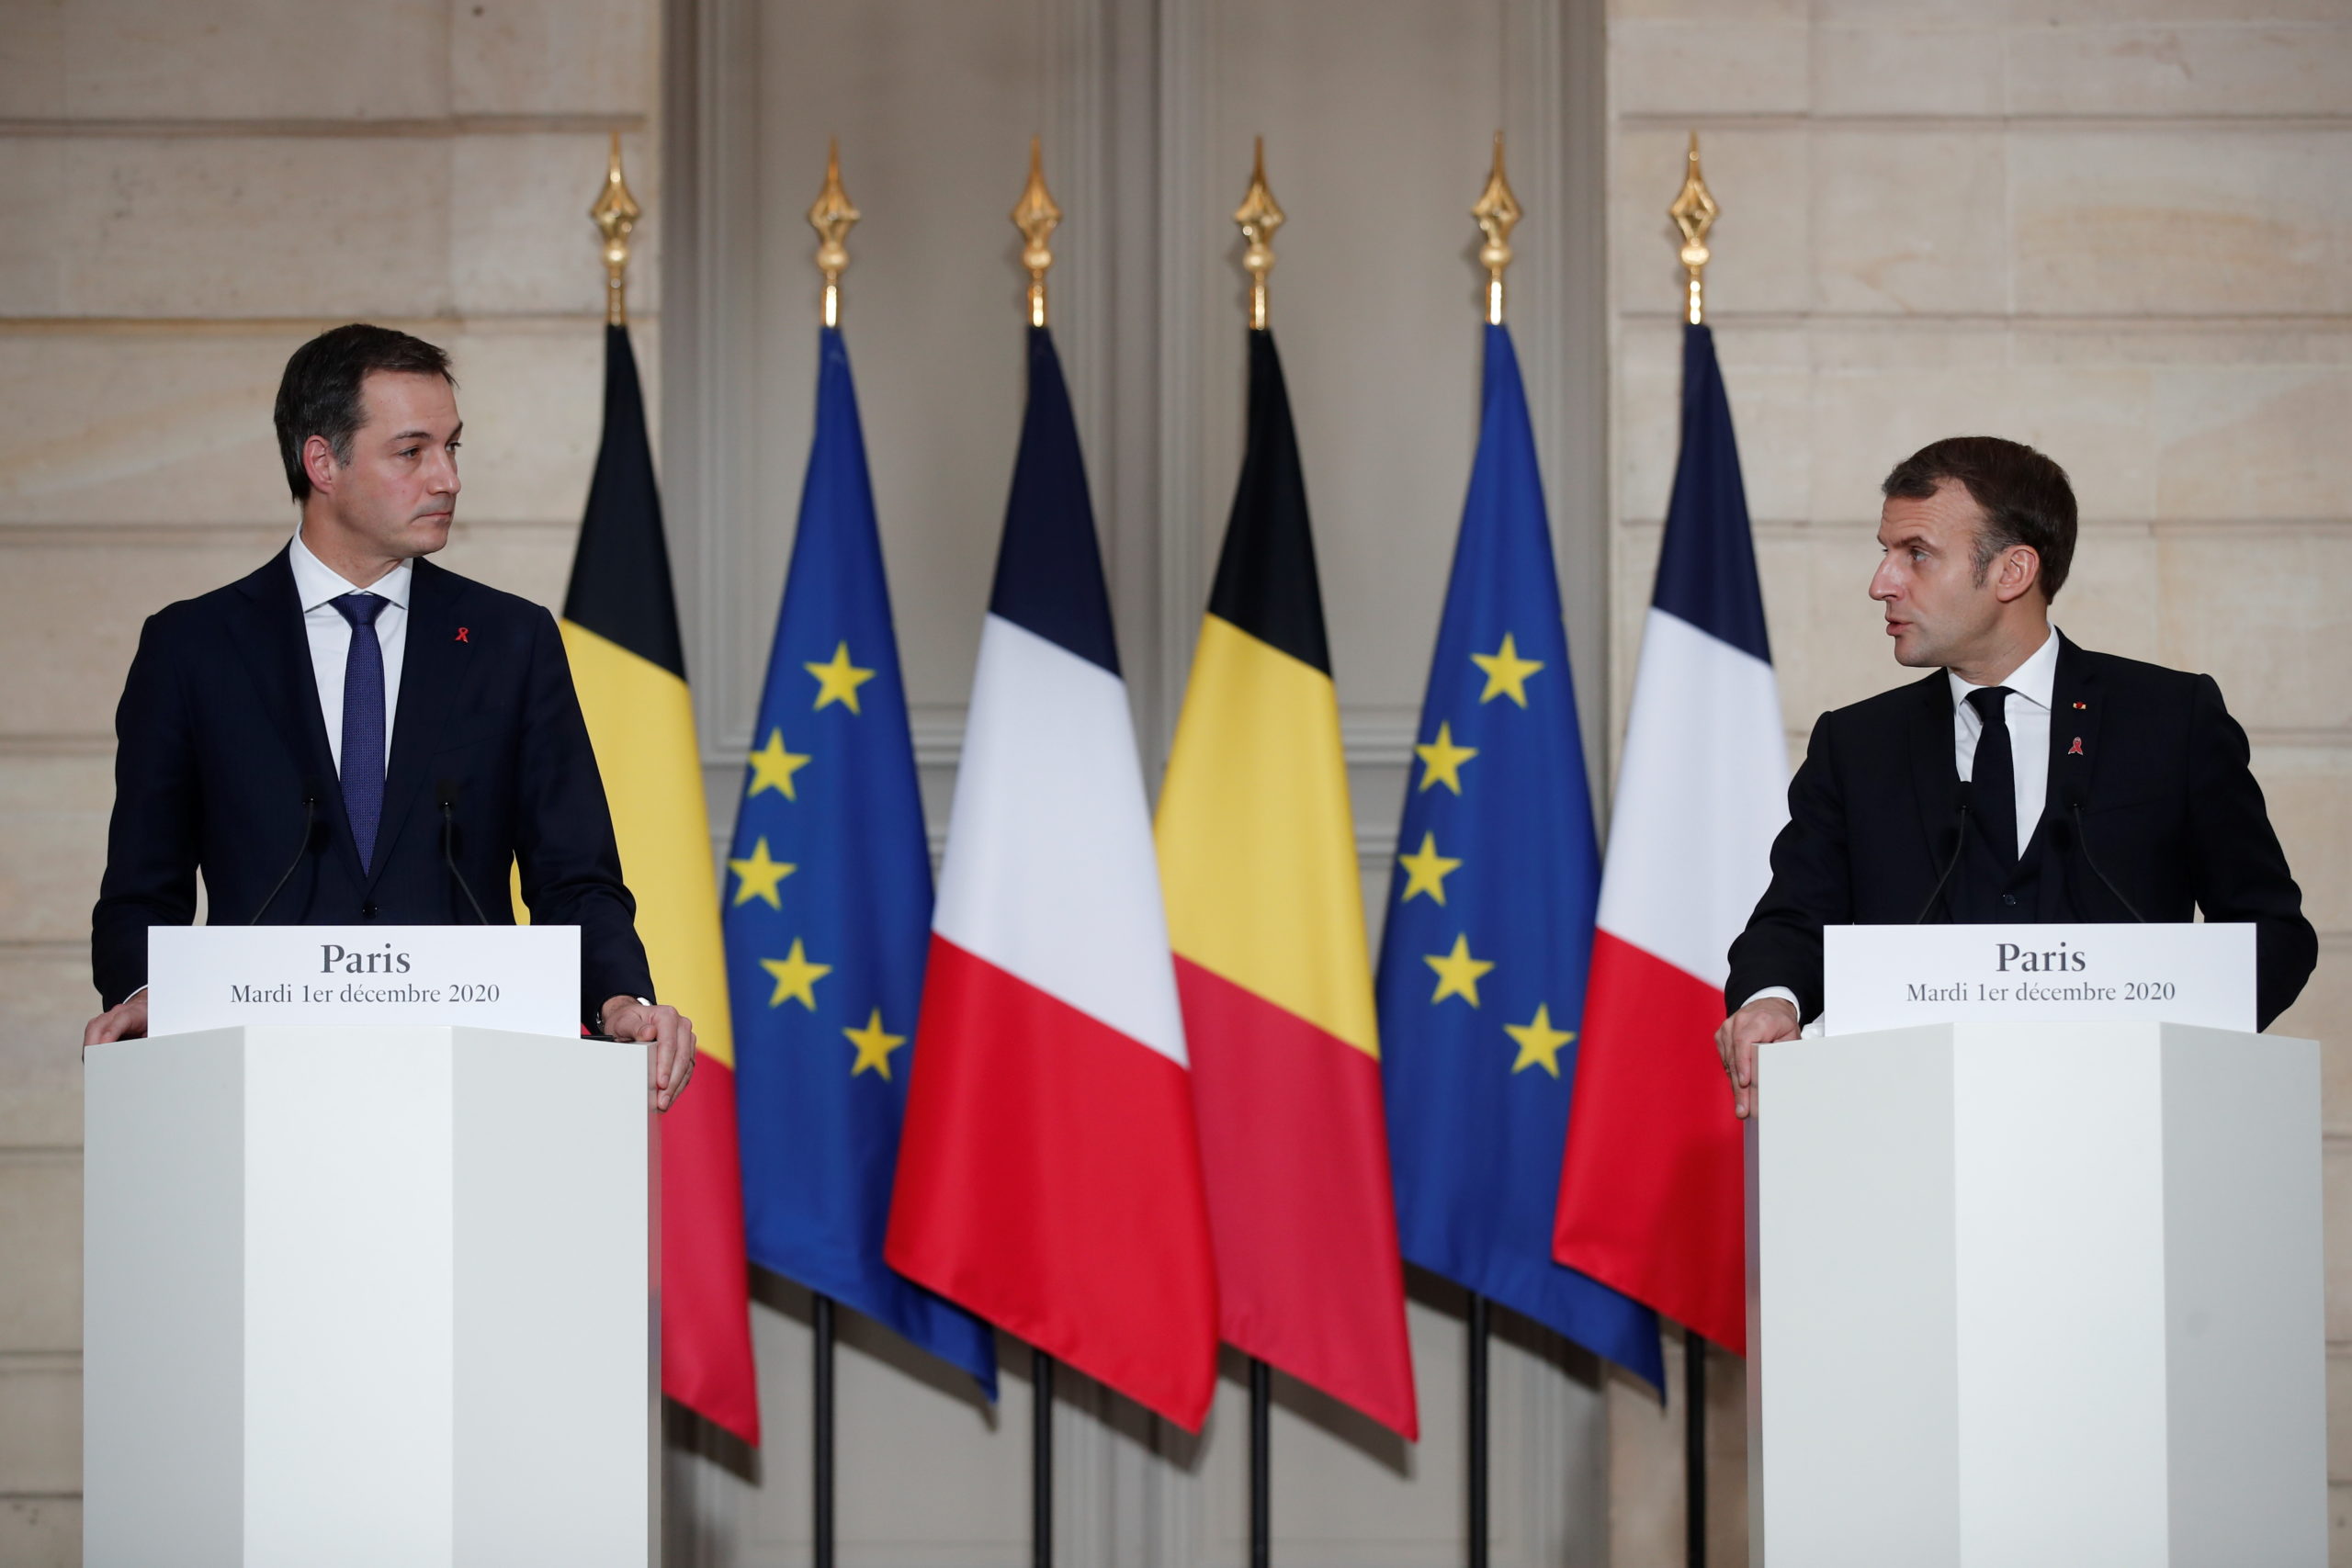 French President Emmanuel Macron commented on the status of French ski slopes during a Tuesday press conference with Belgium Prime Minister Alexander De Croo. (Benoit Tessier/Pool/AFP via Getty Images)